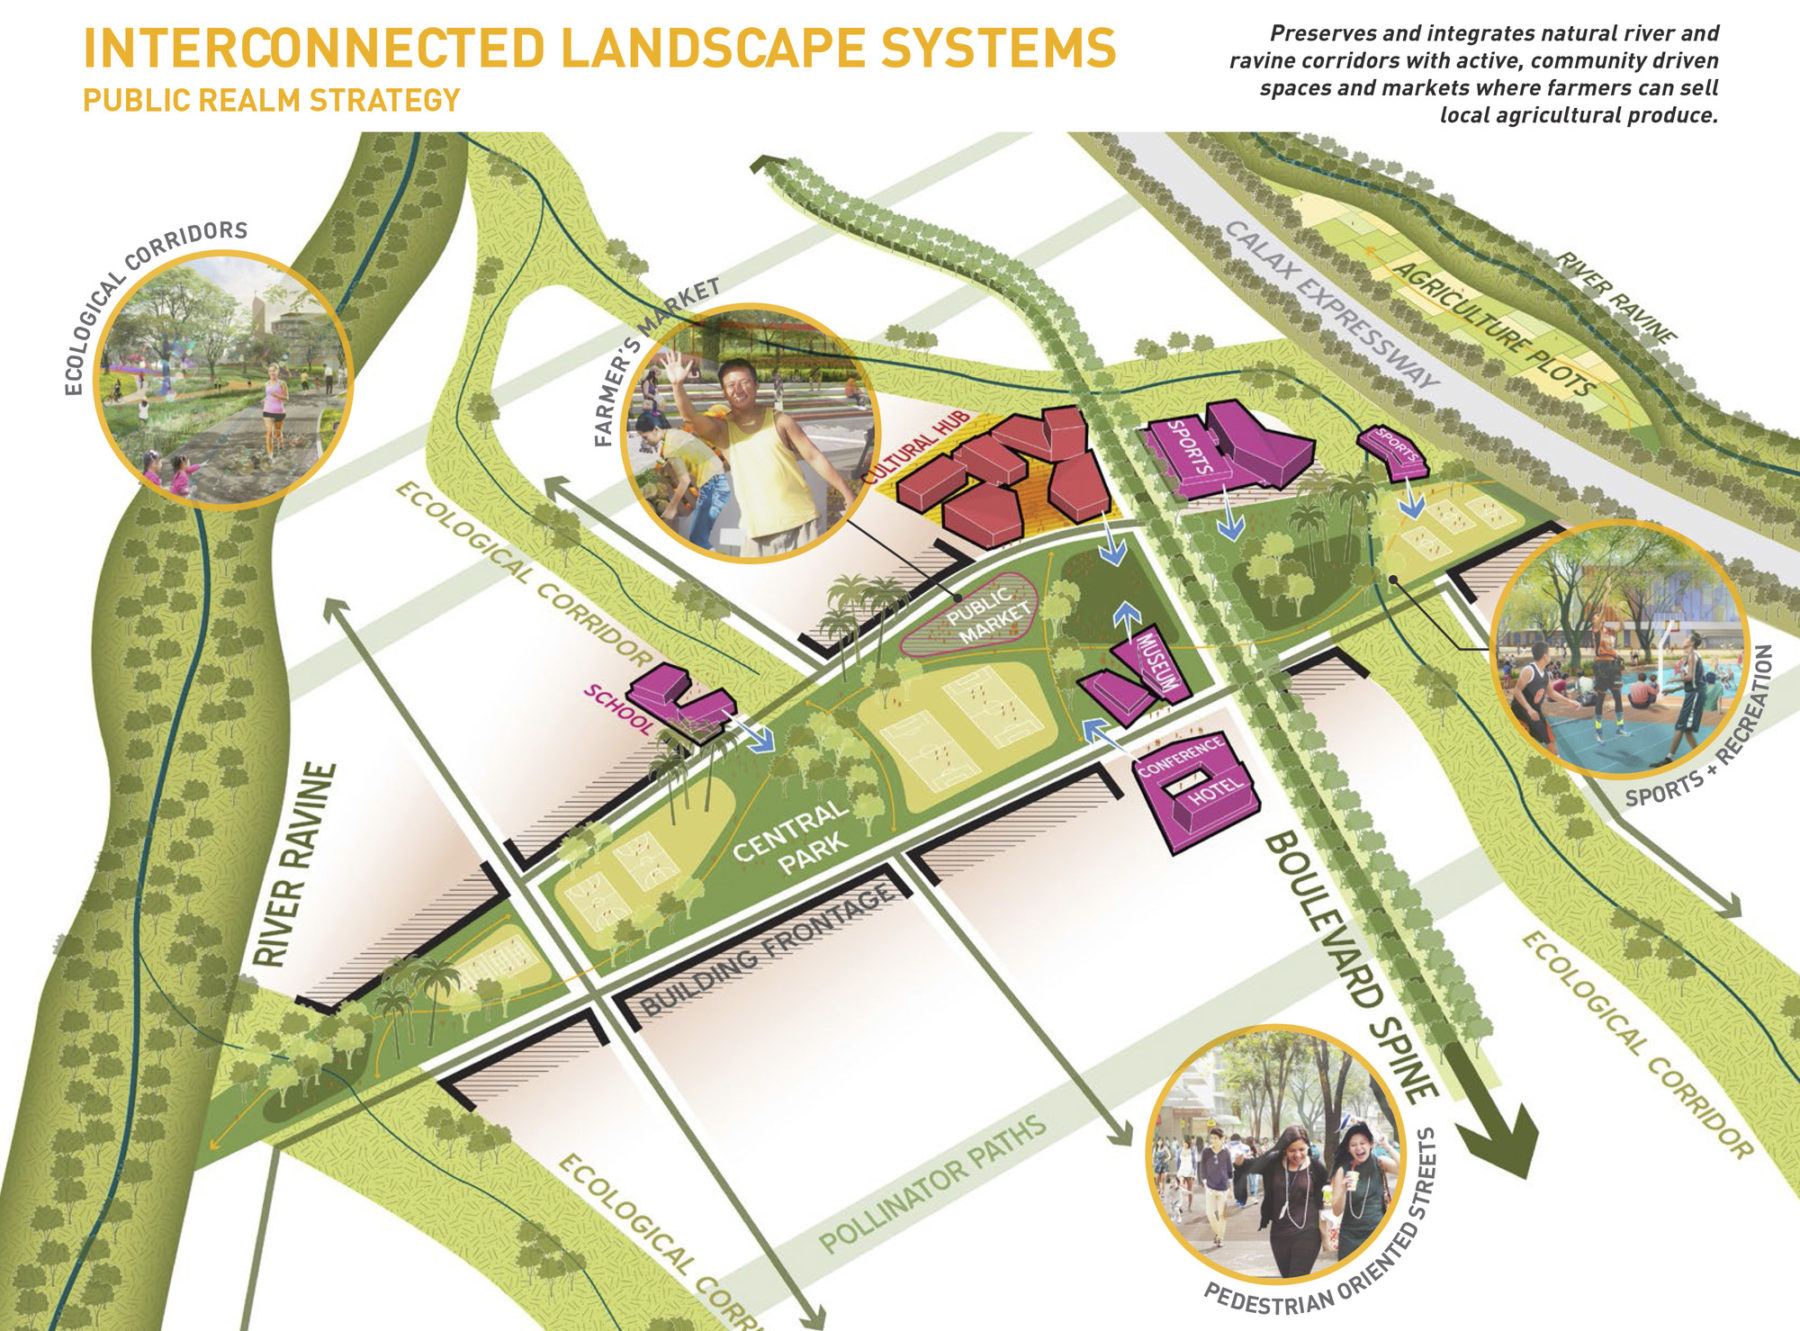 Graphic of interconnected landscape systems